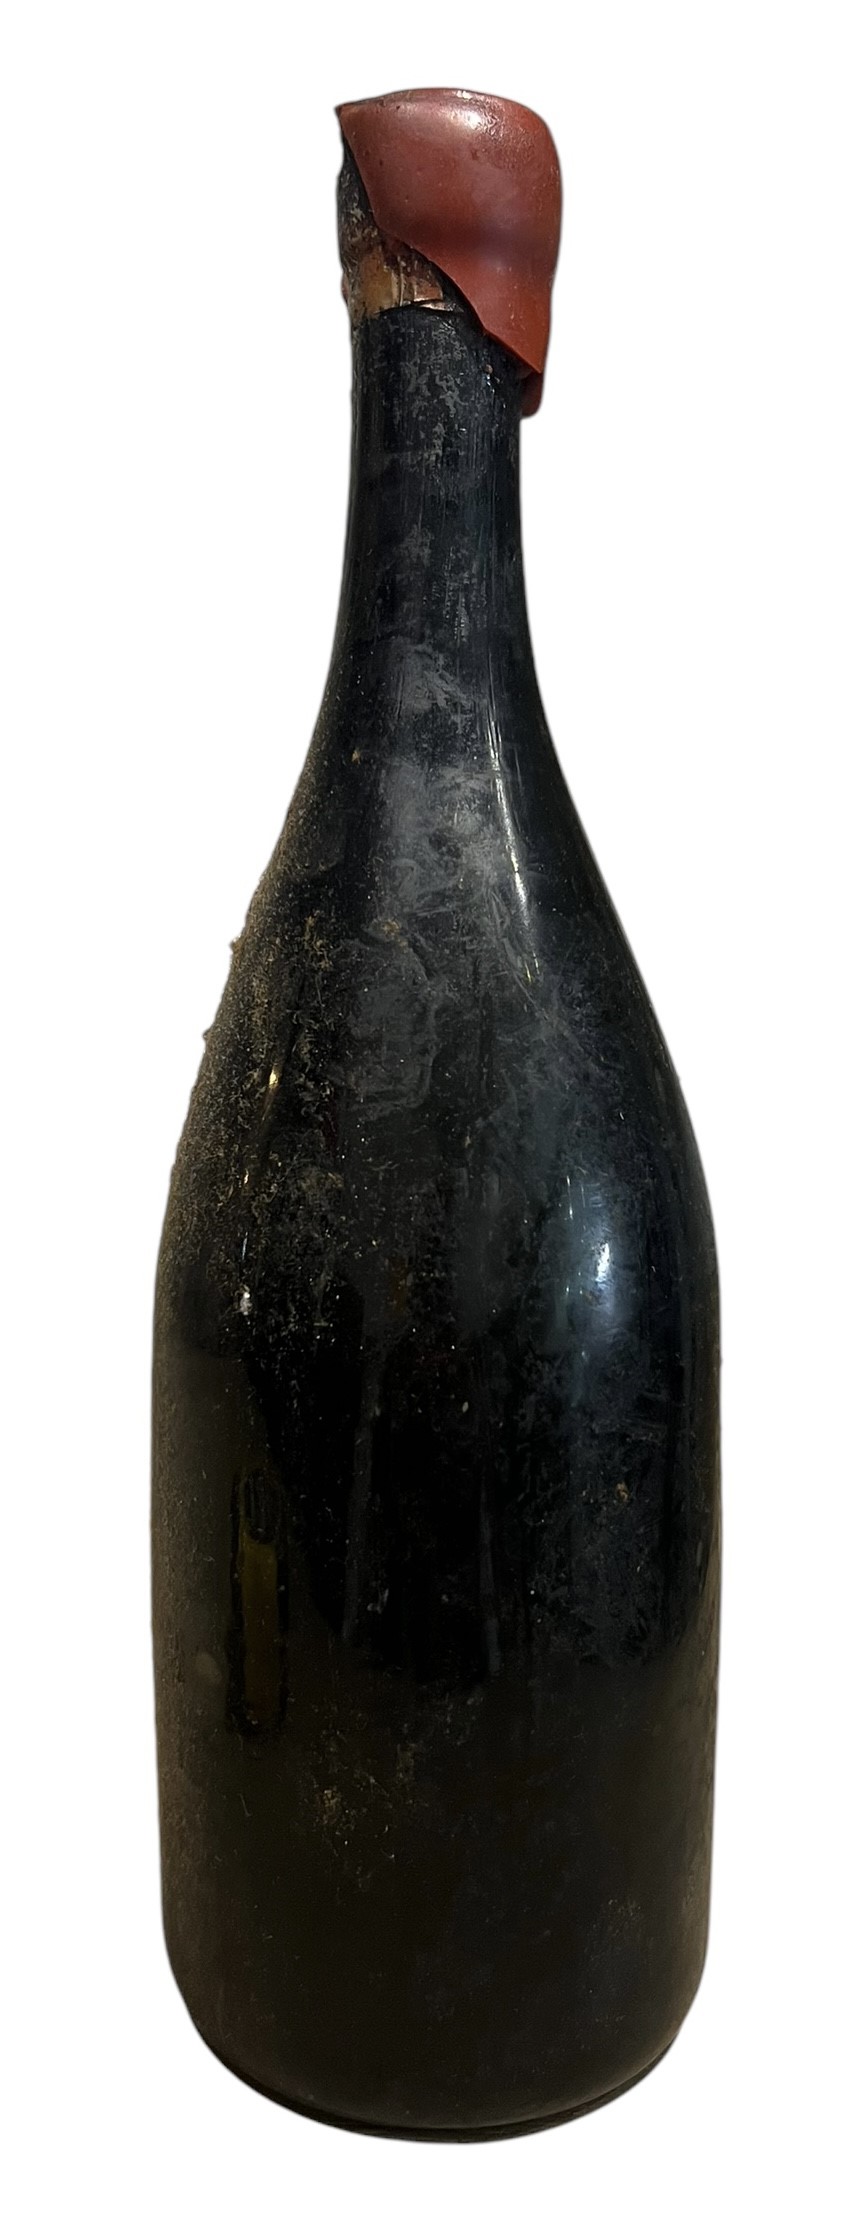 WHITMAN & CO., A 19TH CENTURY POMMARD RED WINE, DATED 1887, RECORKED 9TH NOVEMBER 1979 Red wax - Image 5 of 7